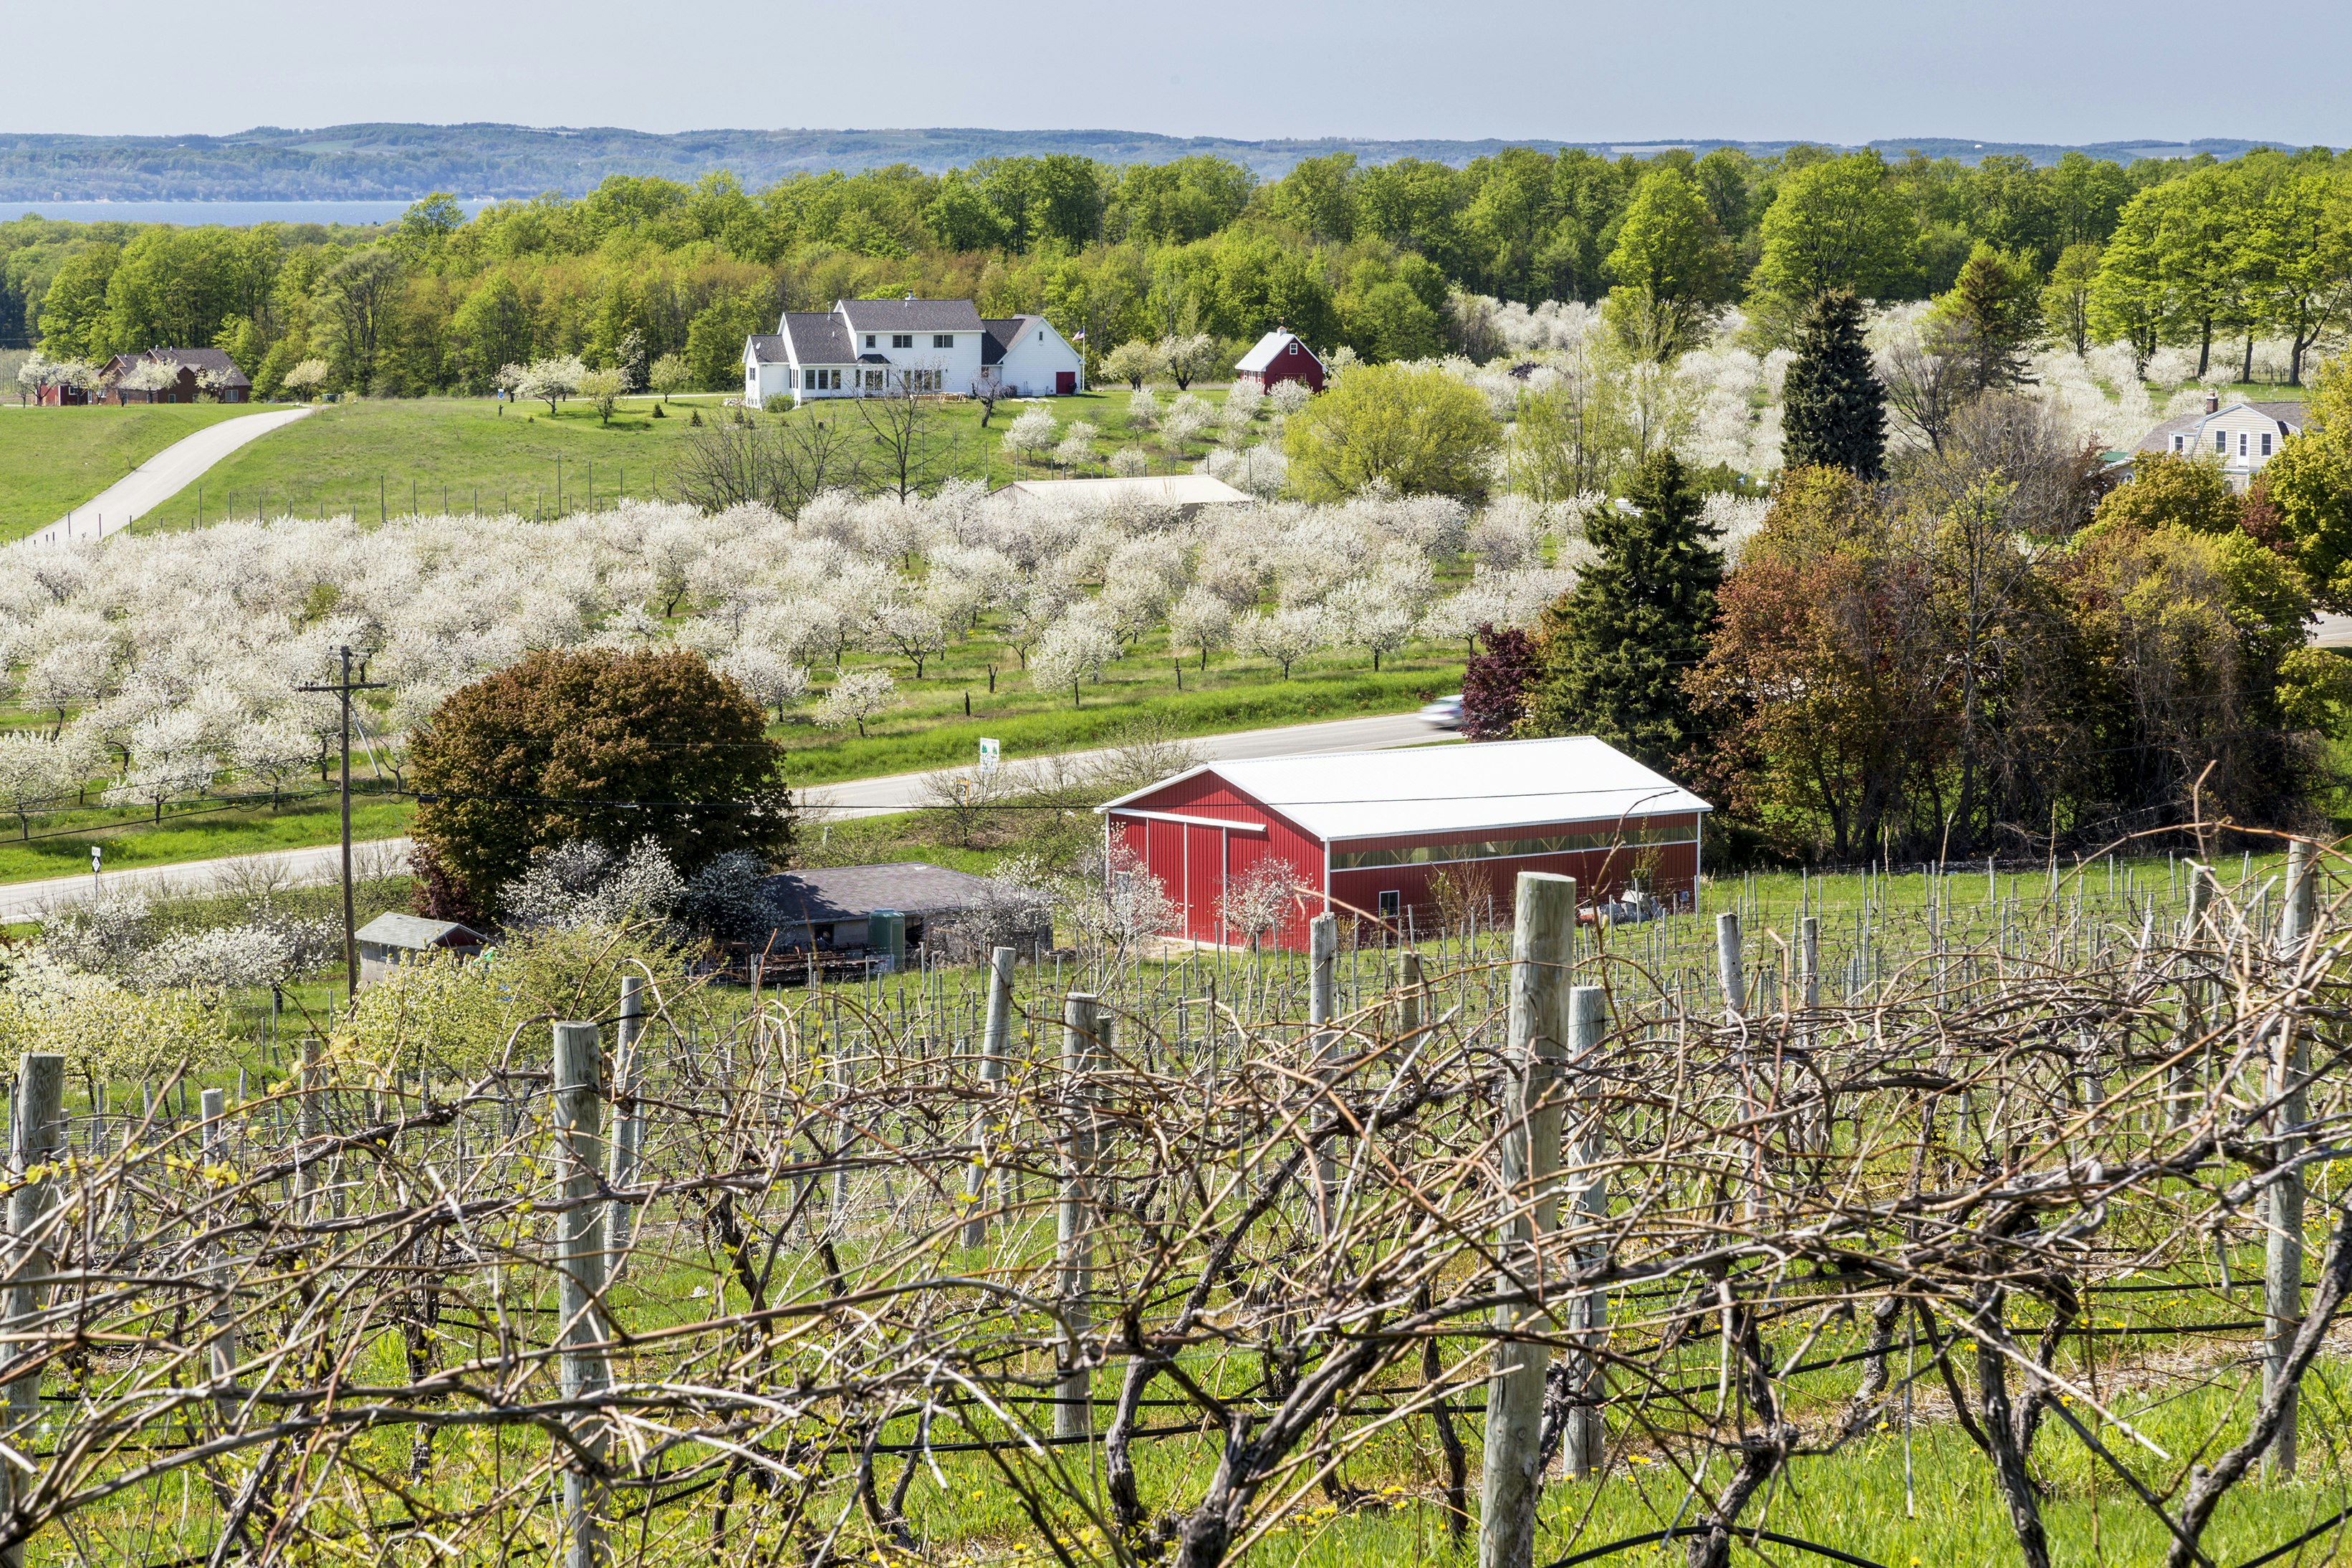 A cherry blossom orchard adjascent to a vineyard, with a red barn in between.